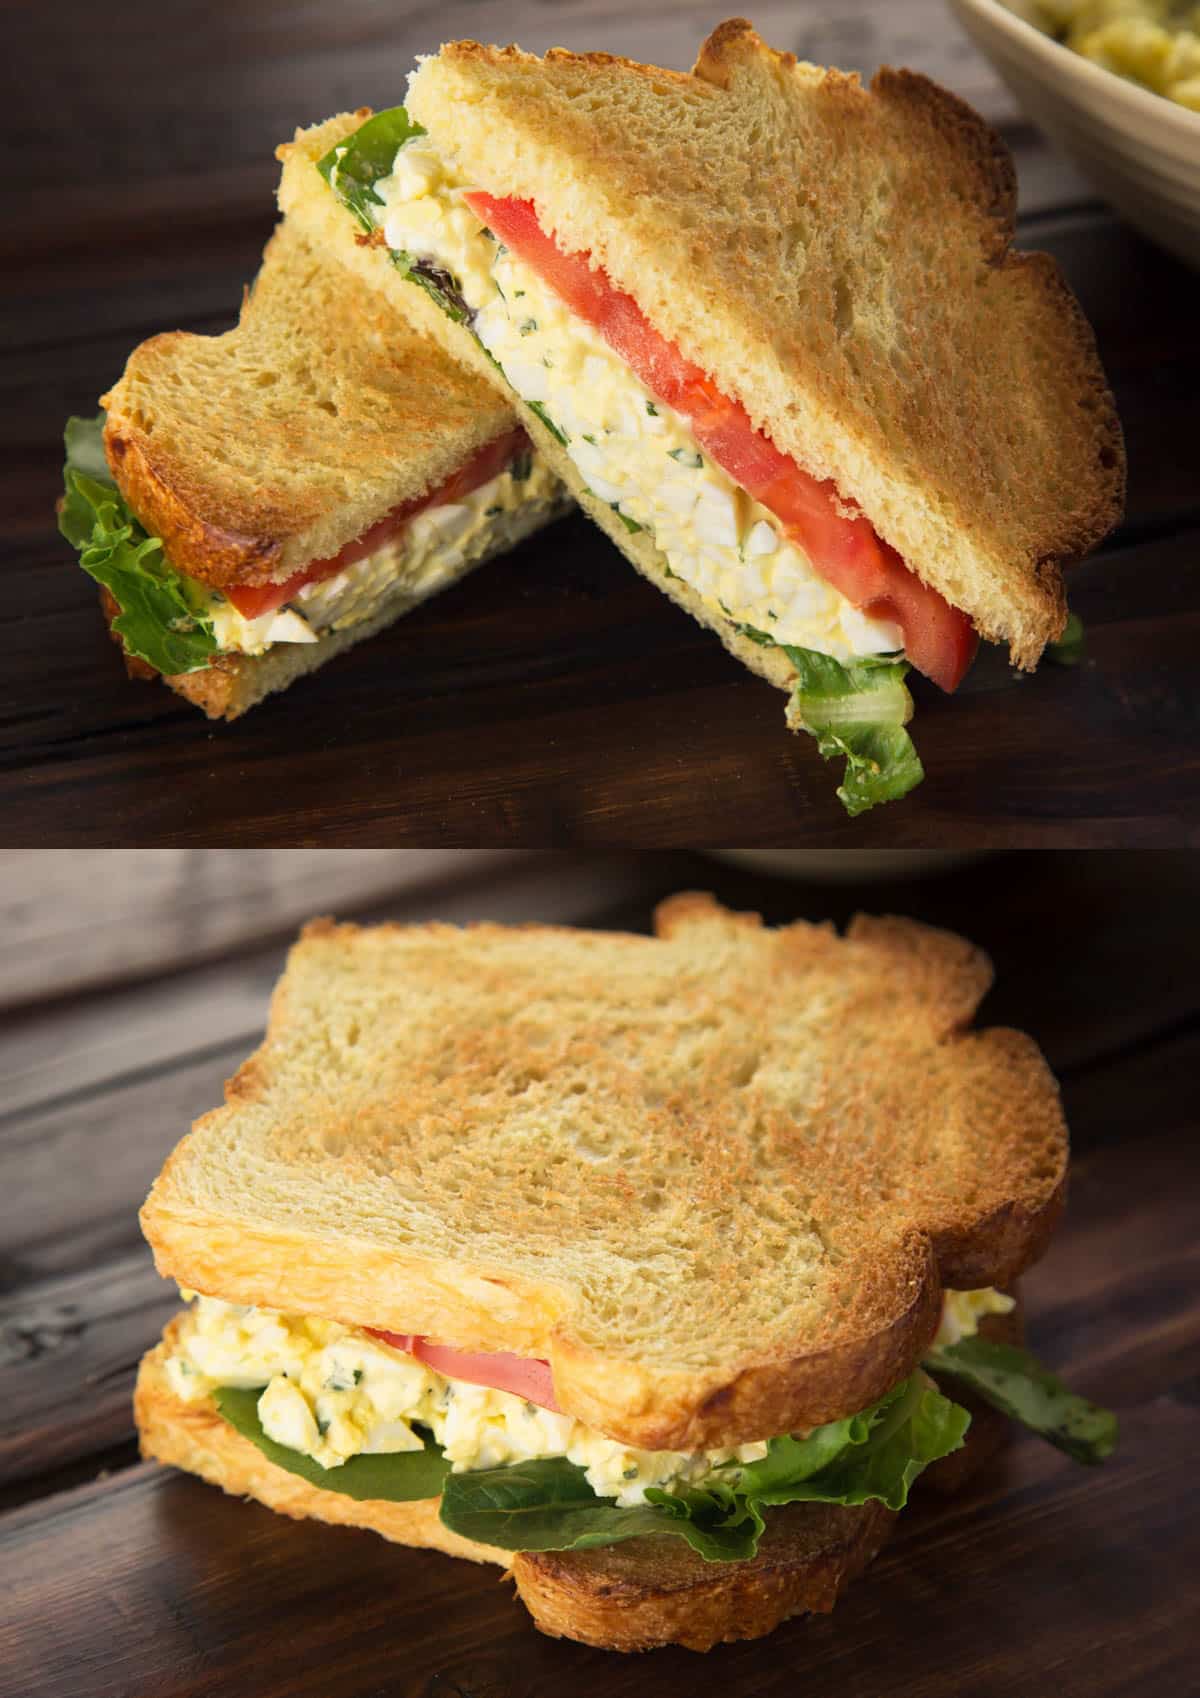 two photos showing a cut and uncut basil egg salad sandwich on toasted brioche with tomato and lettuce